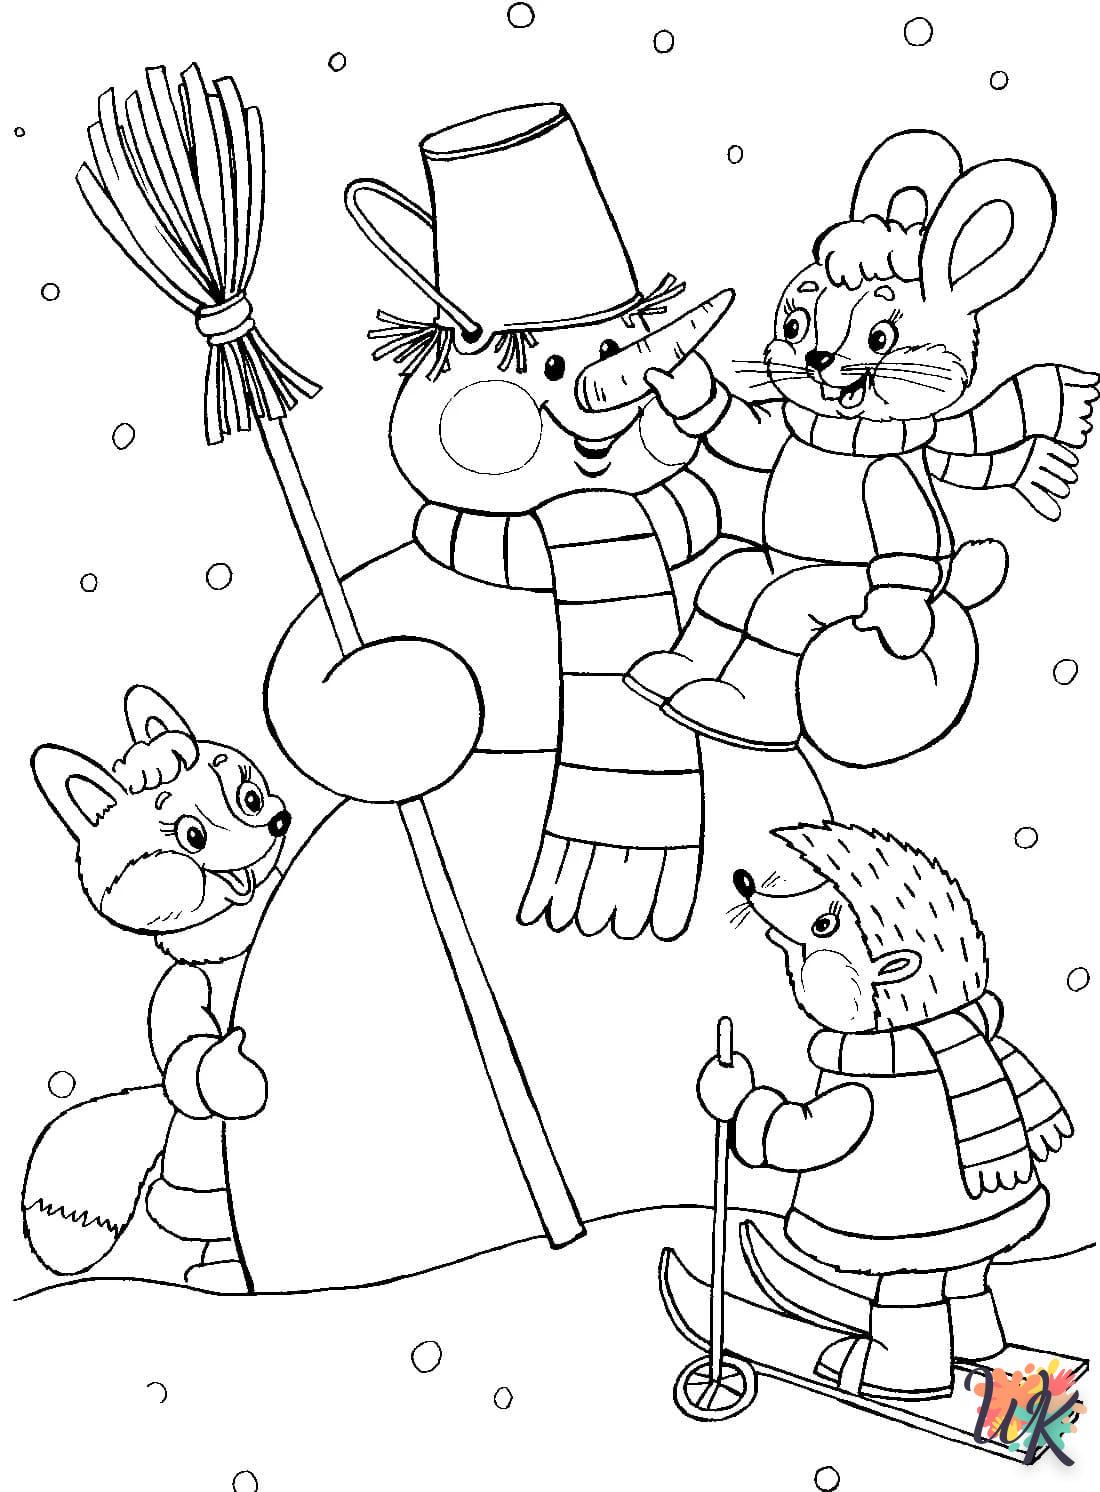 Snowman coloring page to print for 7 year olds